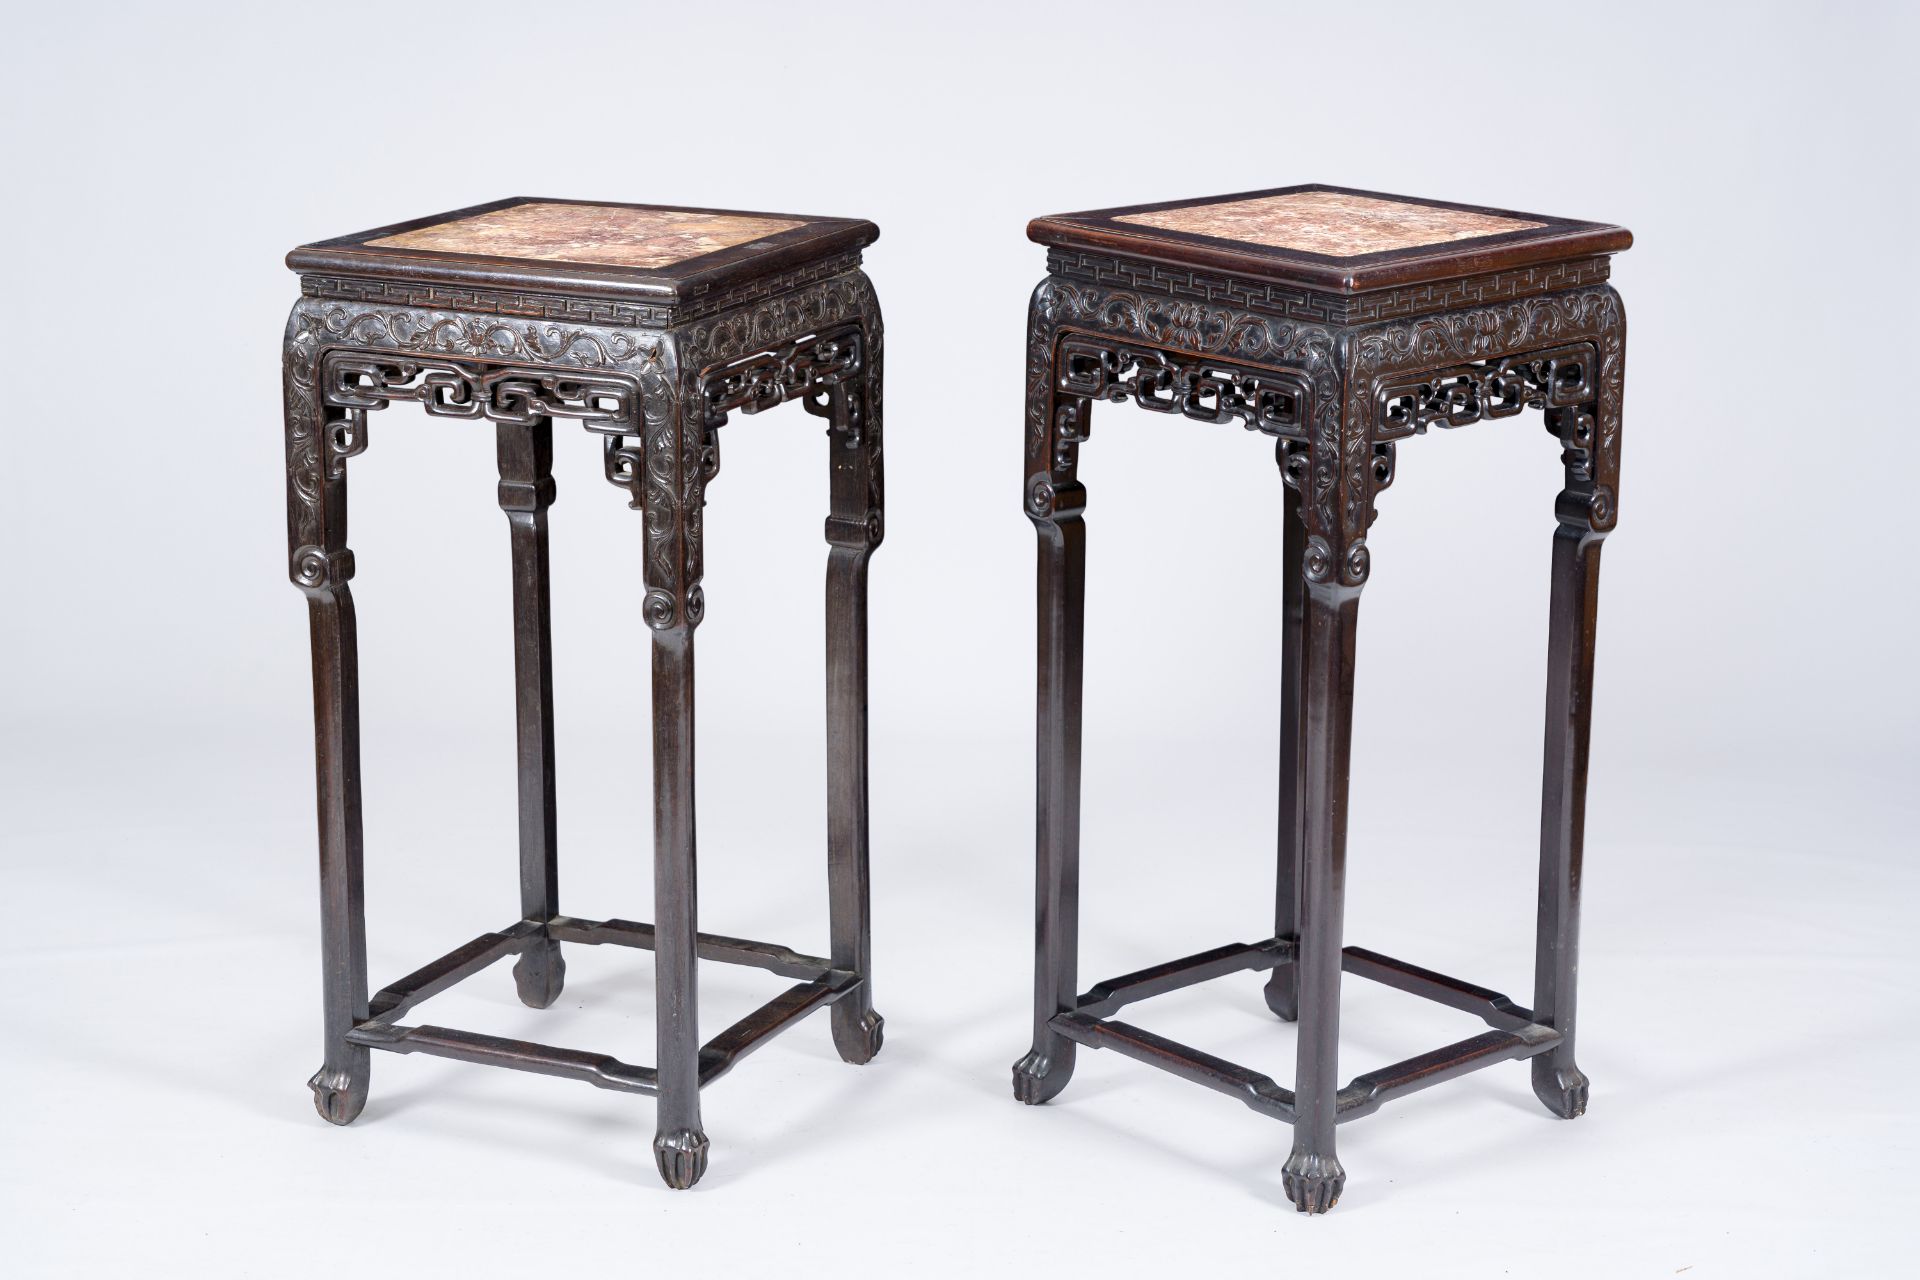 A pair of square Chinese reticulated hardwood stands with marble tops, 19th C.